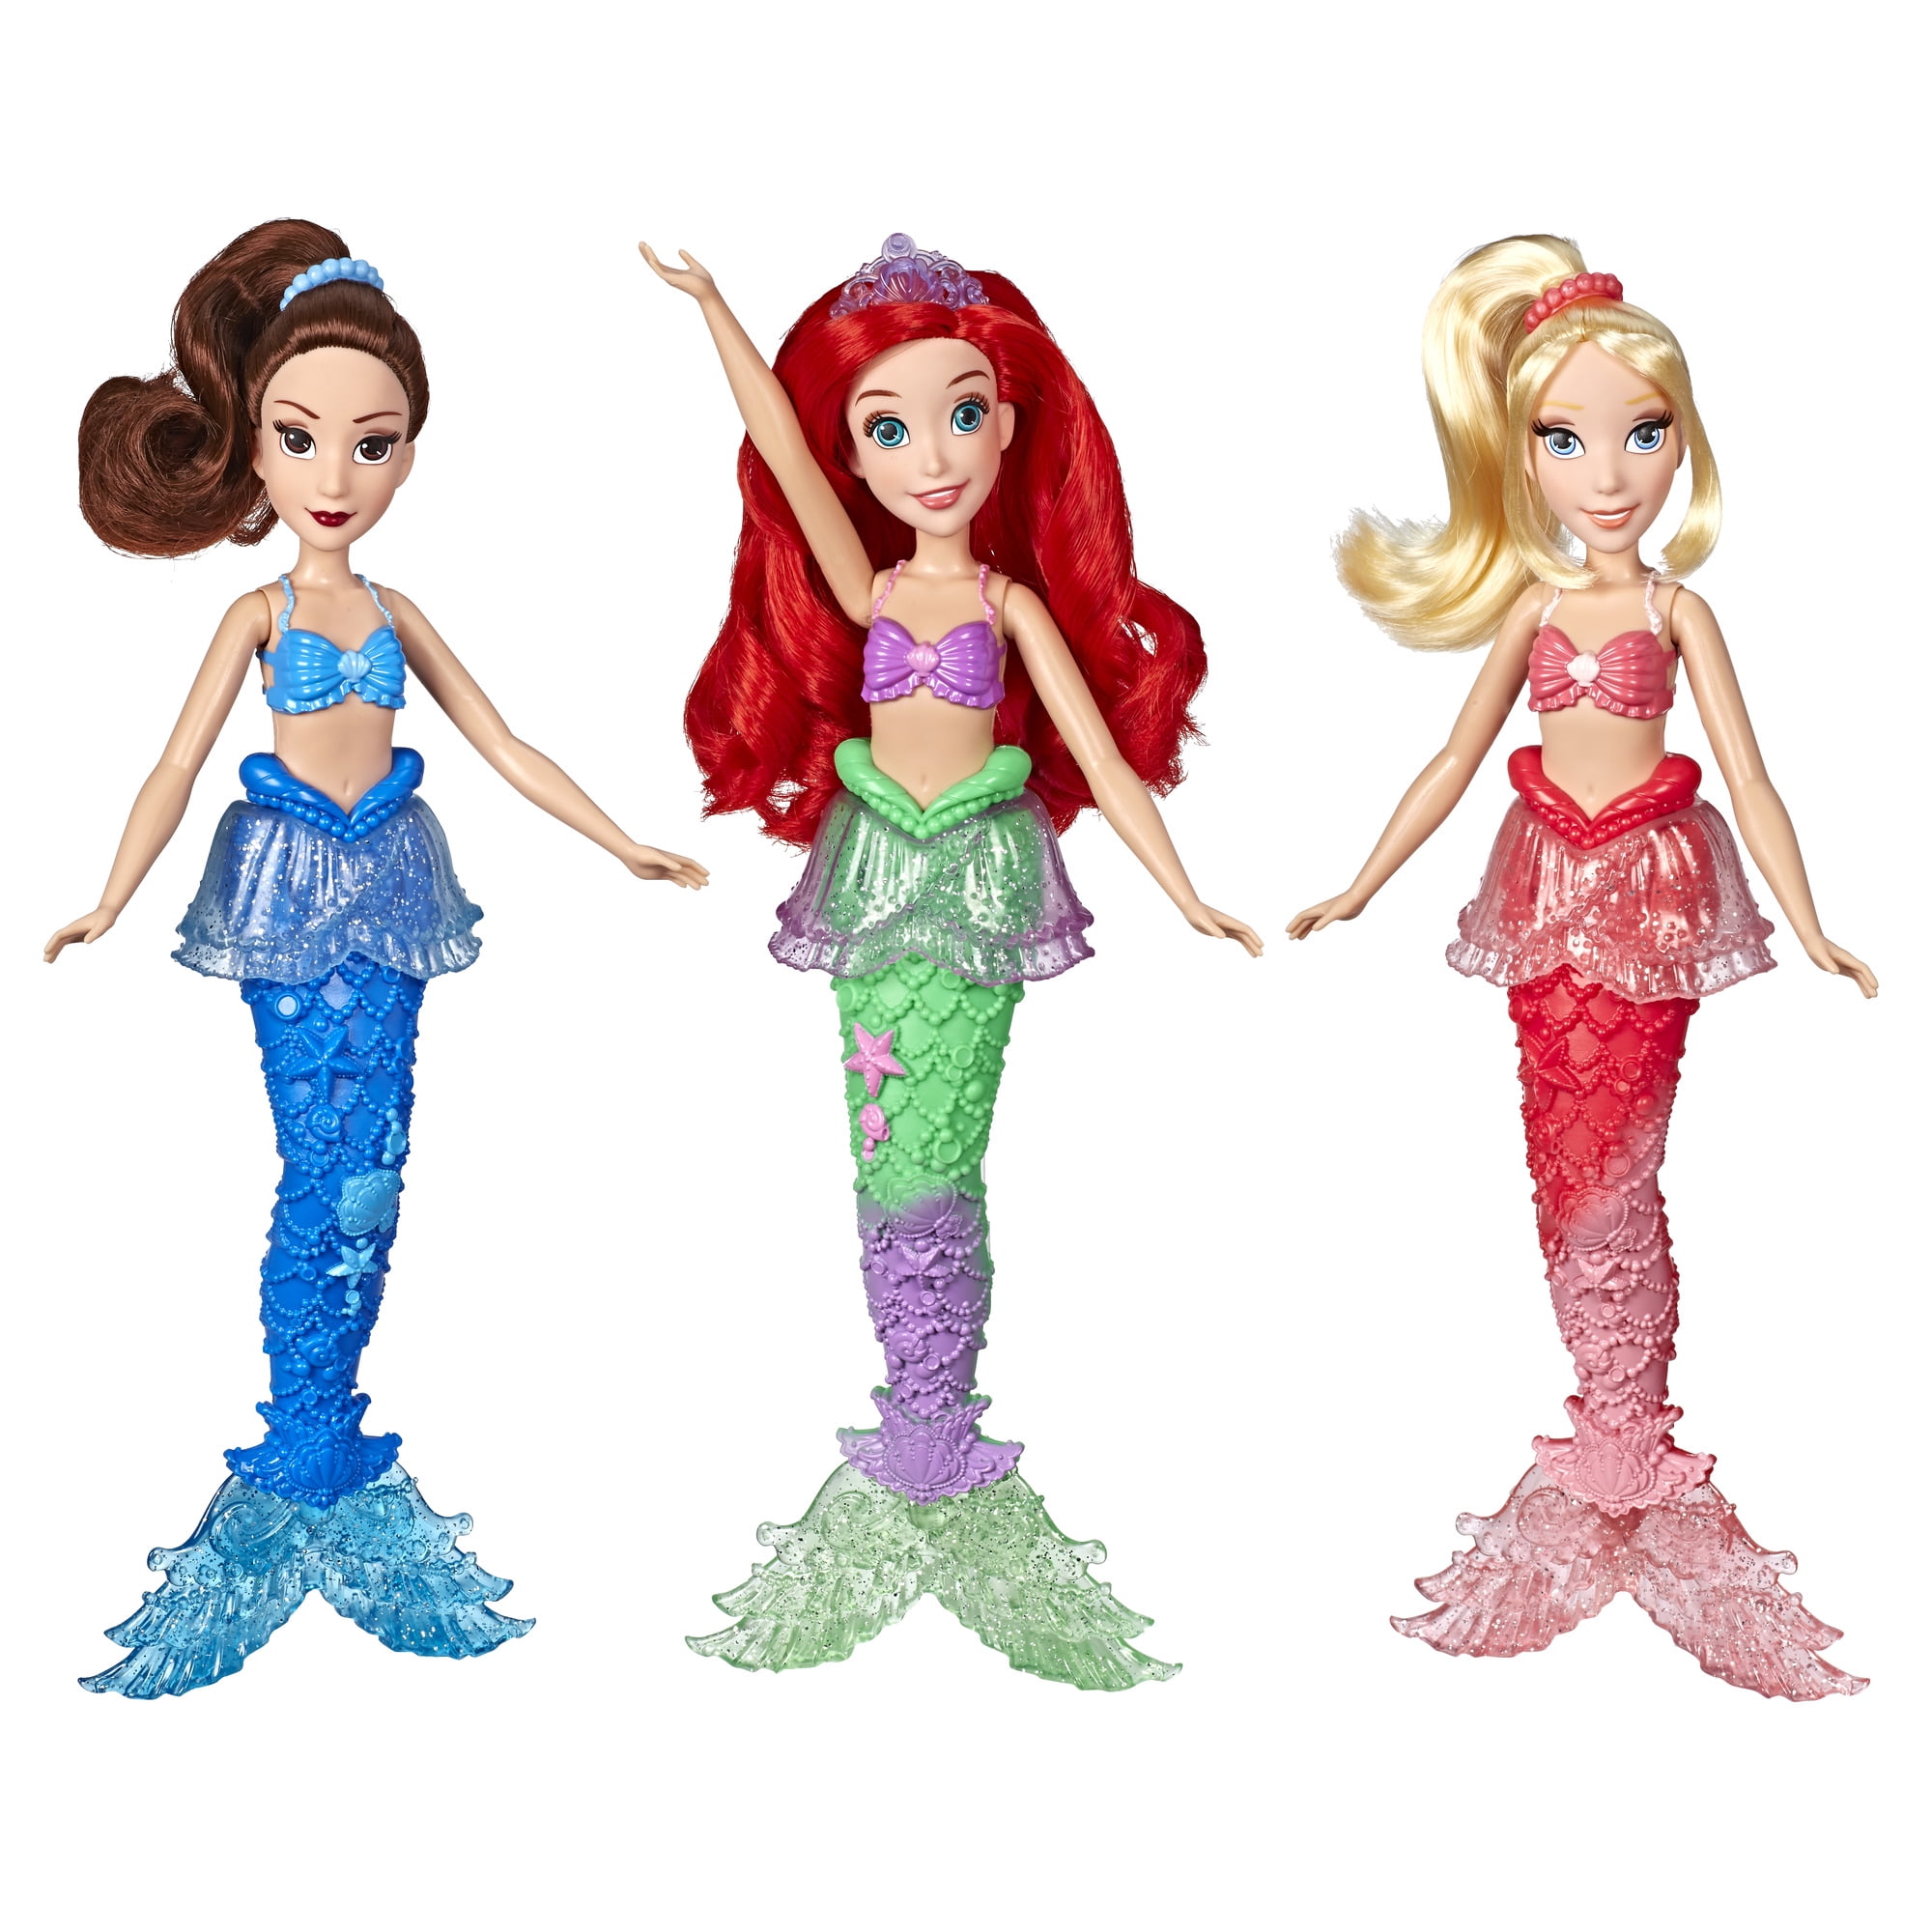 MERMAID DOLLS PACK OF 3 TOYS GIFTS DECORATIONS 6" BENDABLE  NEW PARTY FAVORS 